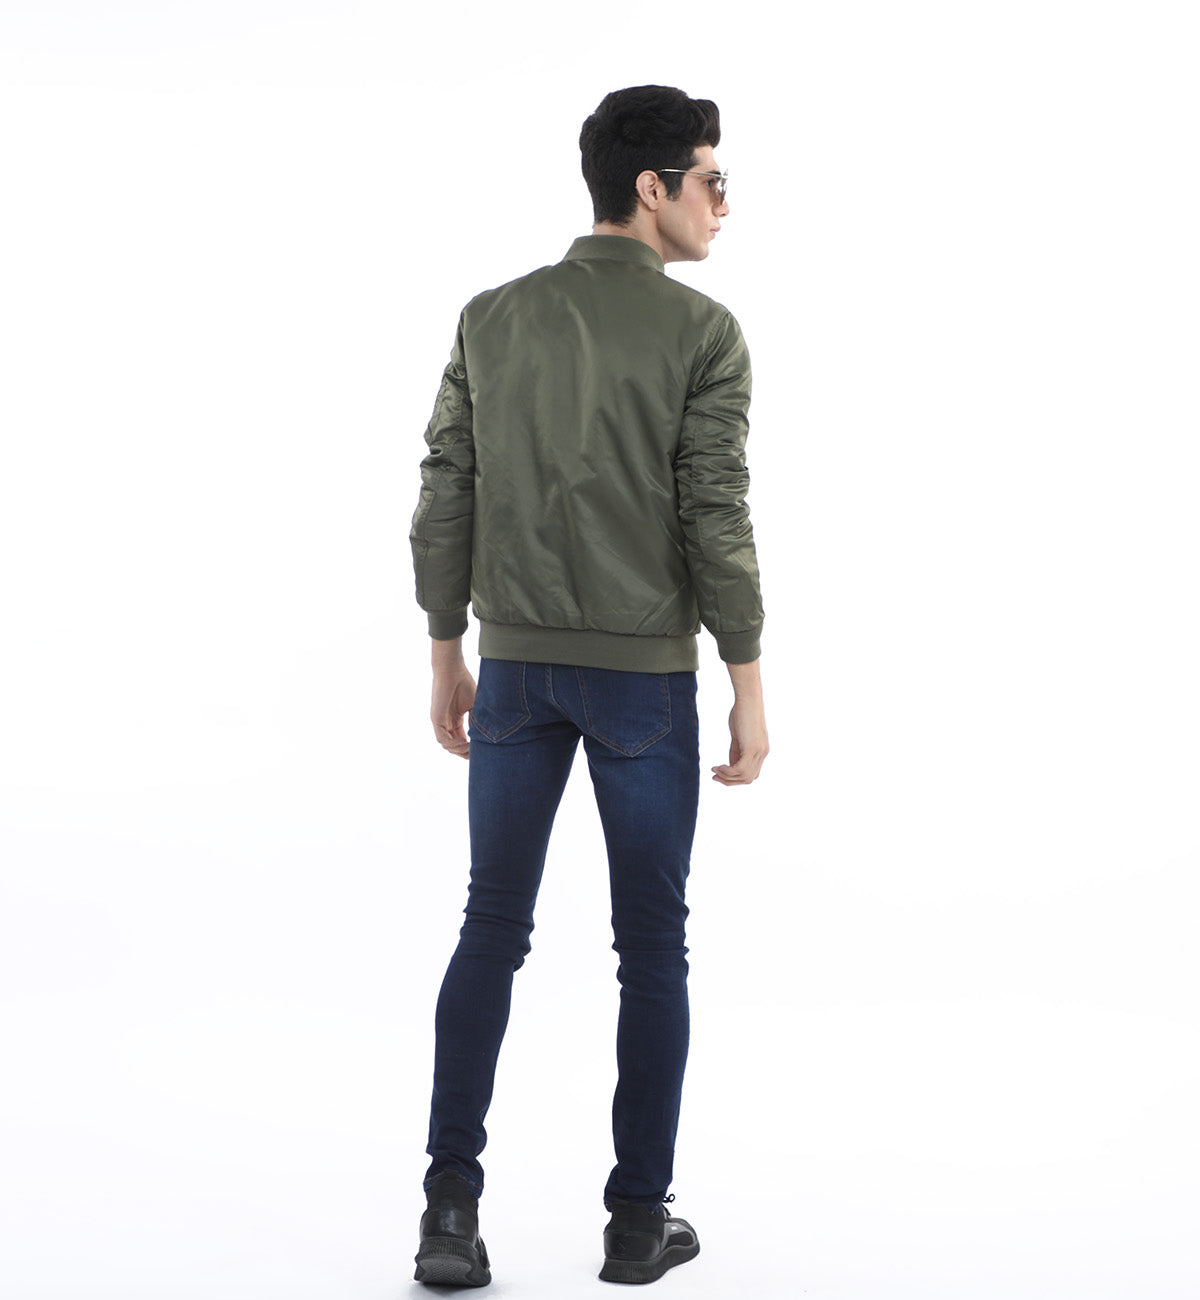 green army jacket for men